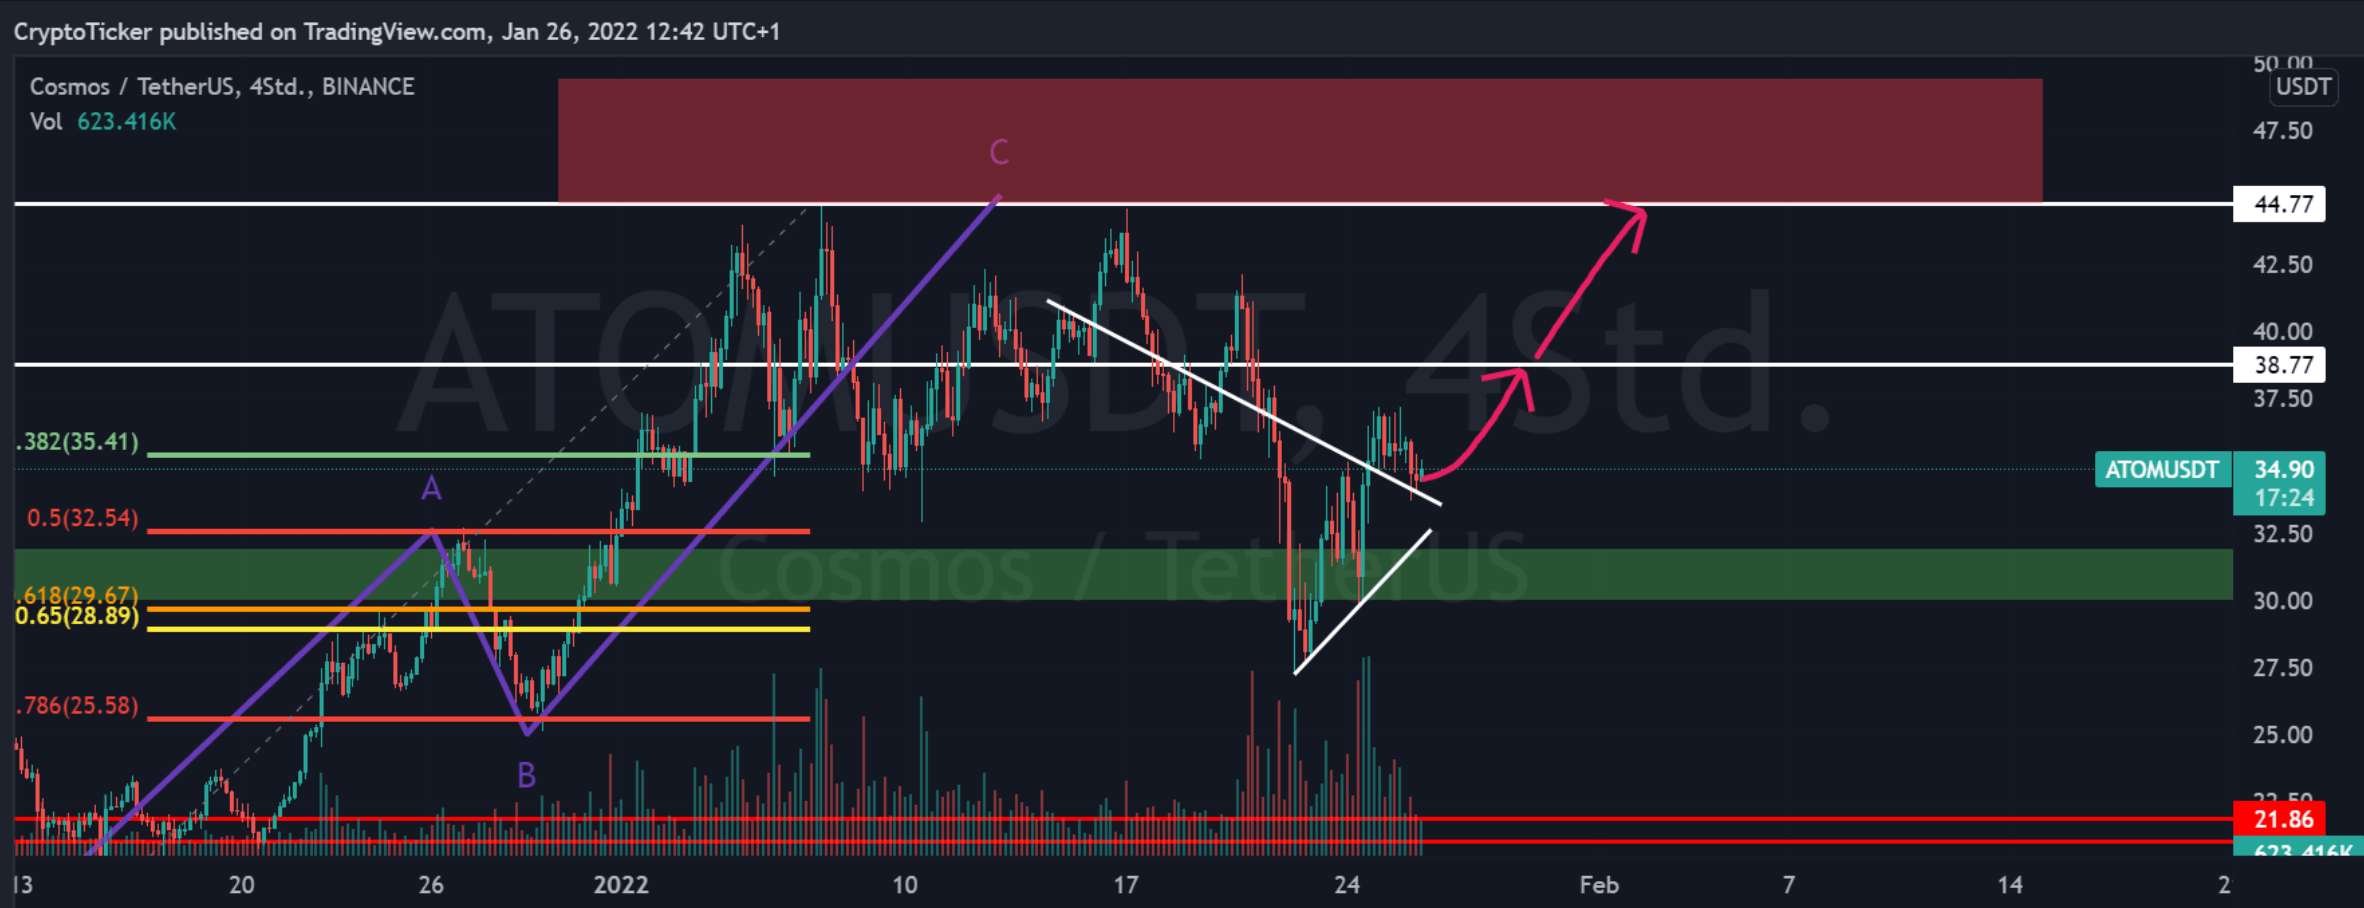 ATOM price prediction - ATOM/USD 4-hours chart showing the potential uptrend of ATOM